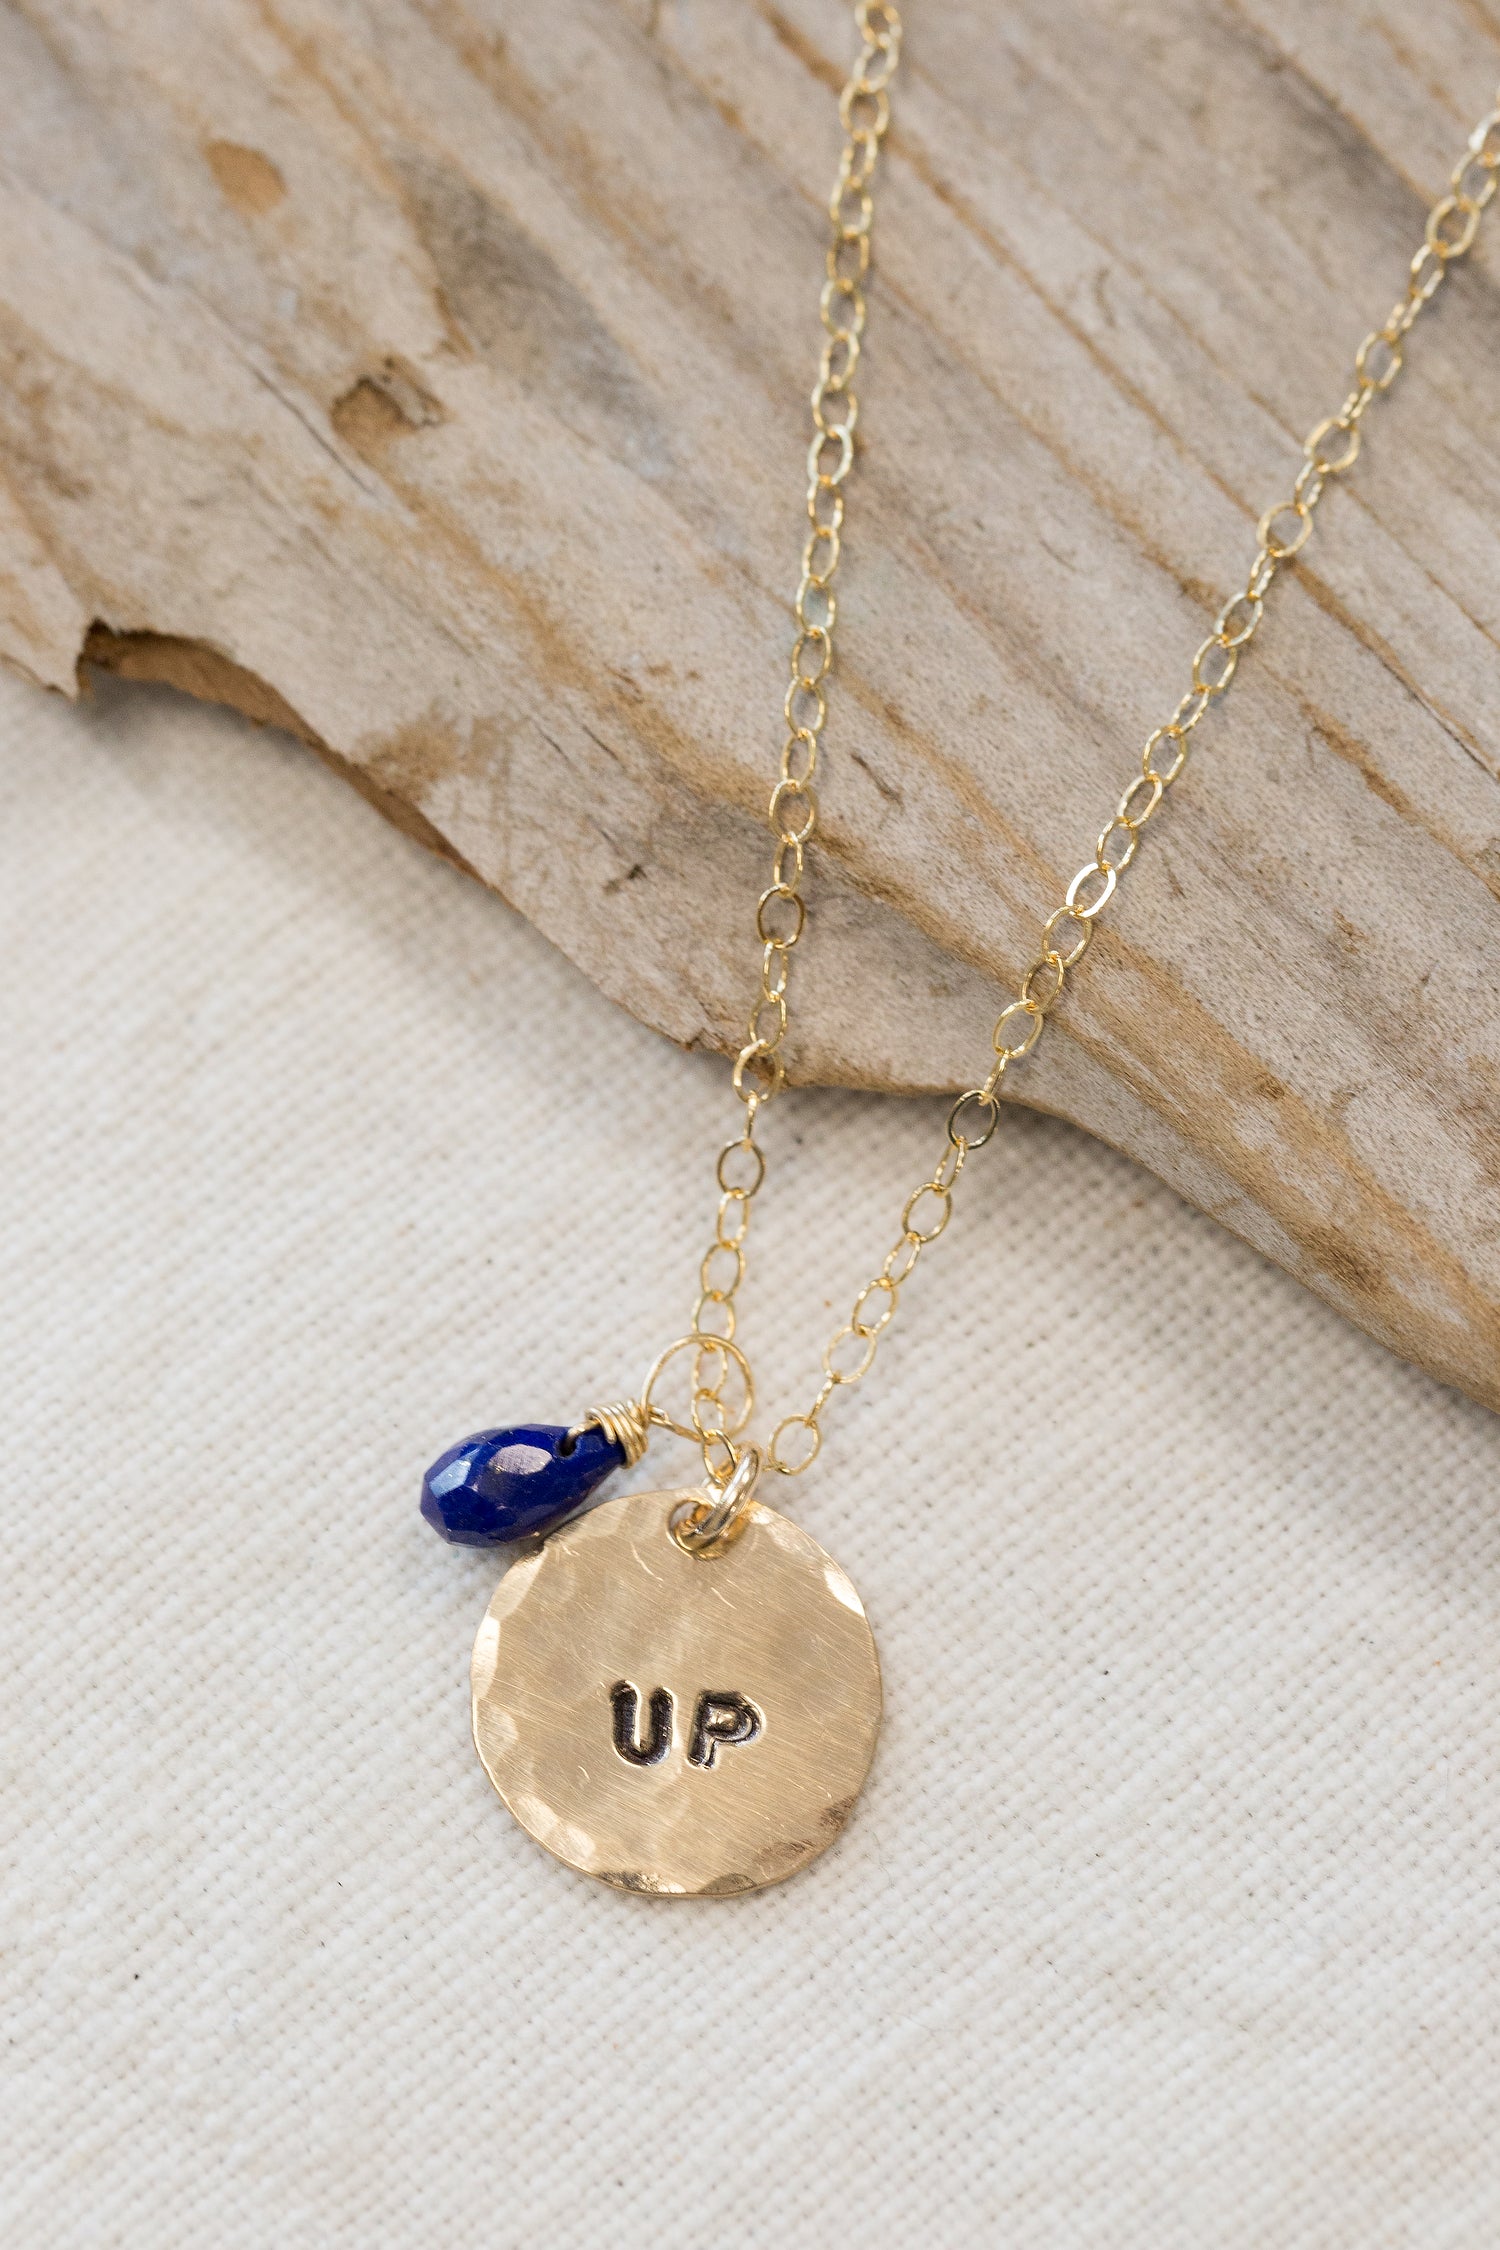 gold filled medium size circle (less than a dime) with the word "up" stamped on it and a blue bead on a gold chain